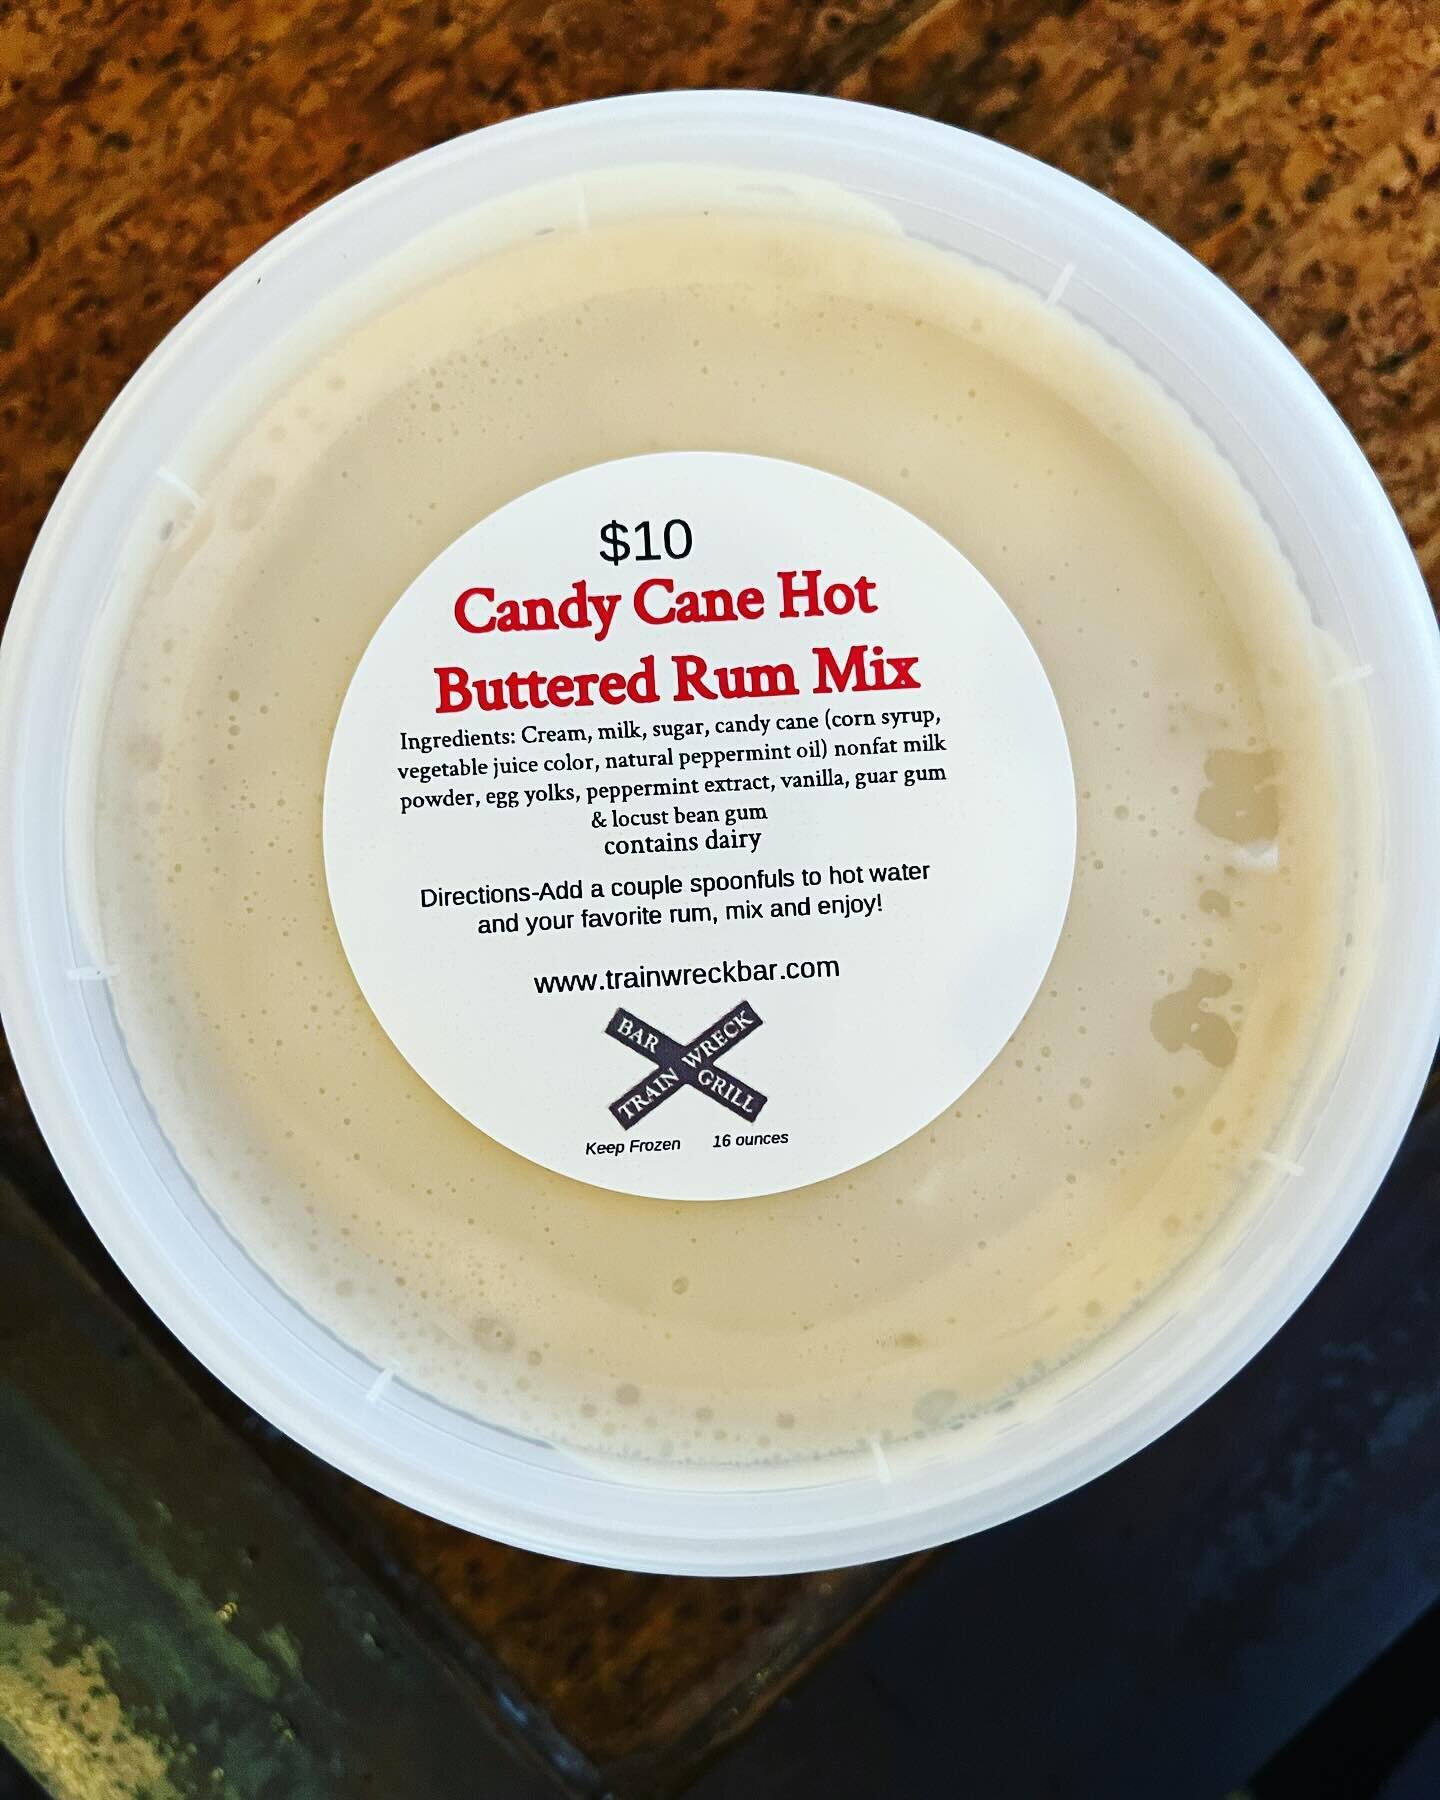 Alright Train Wreckers&mdash;you asked for it and we made a batch early! We have 24 packages of Candy Cane Hot Buttered Rum Mix available for take home, come and get it!